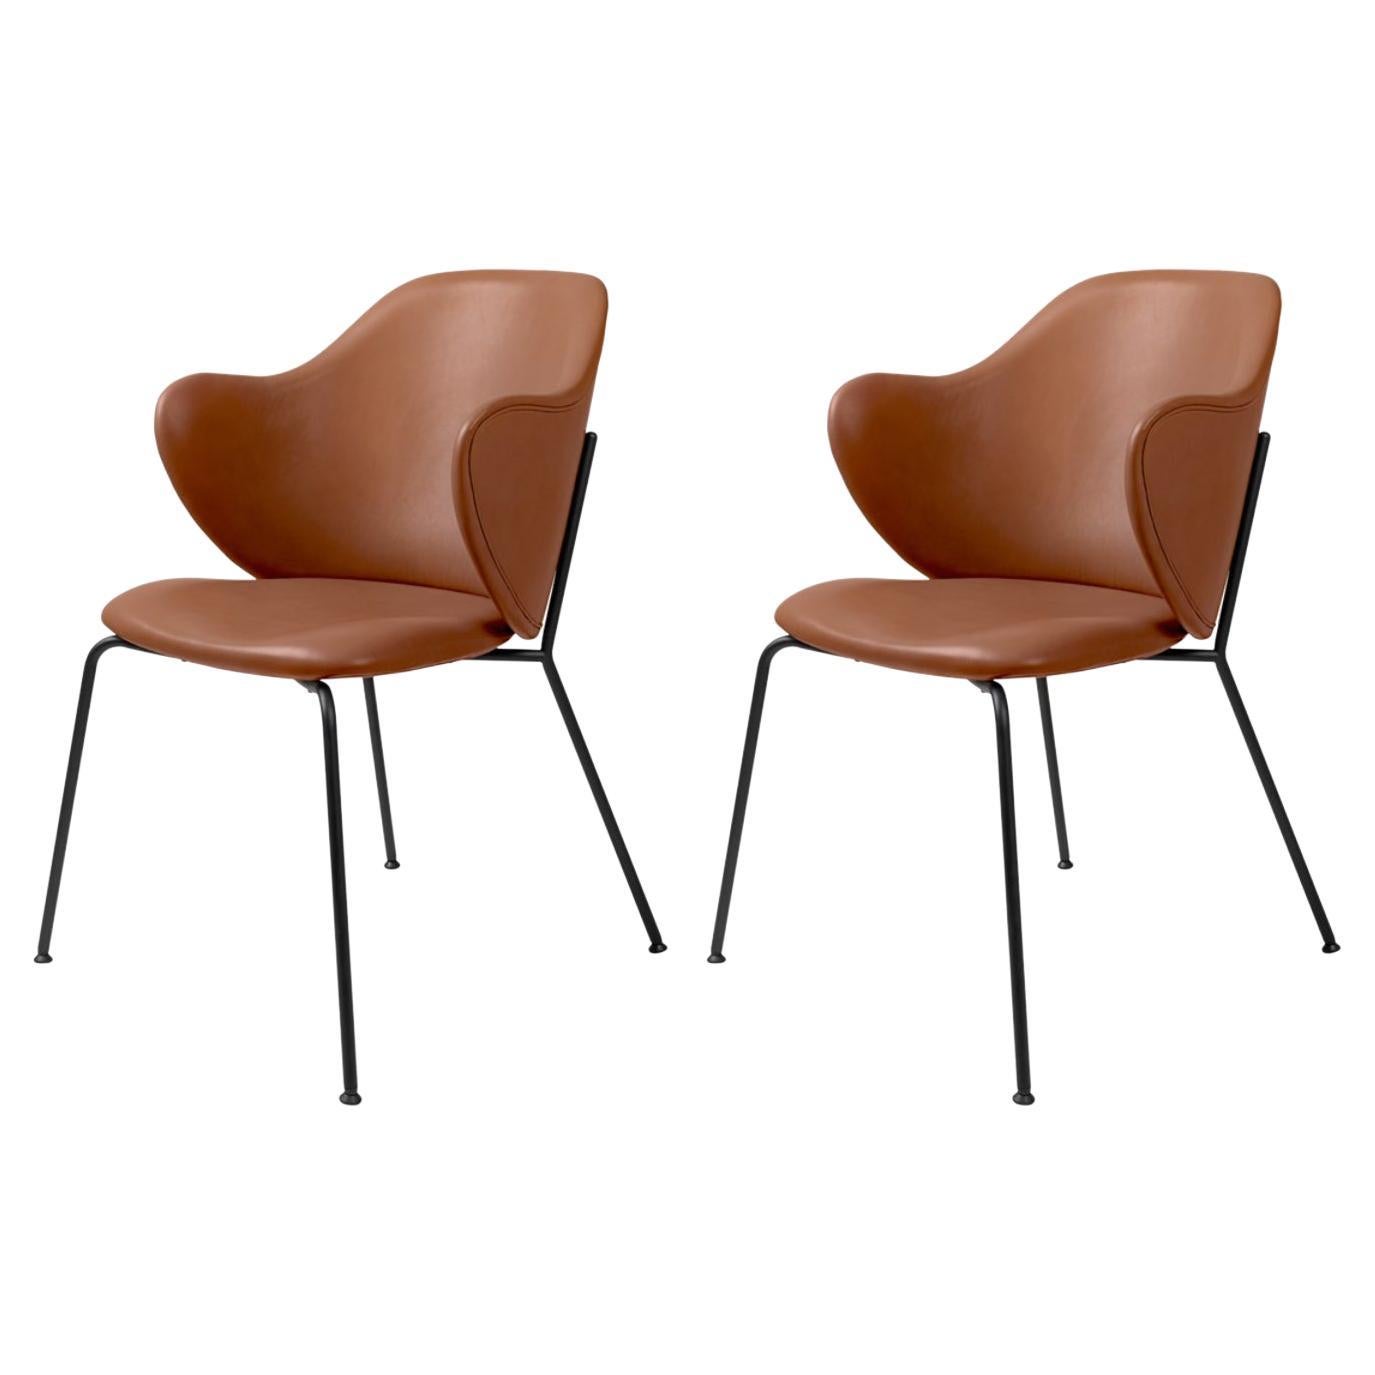 Set of 2 Brown Leather Lassen Chairs by Lassen